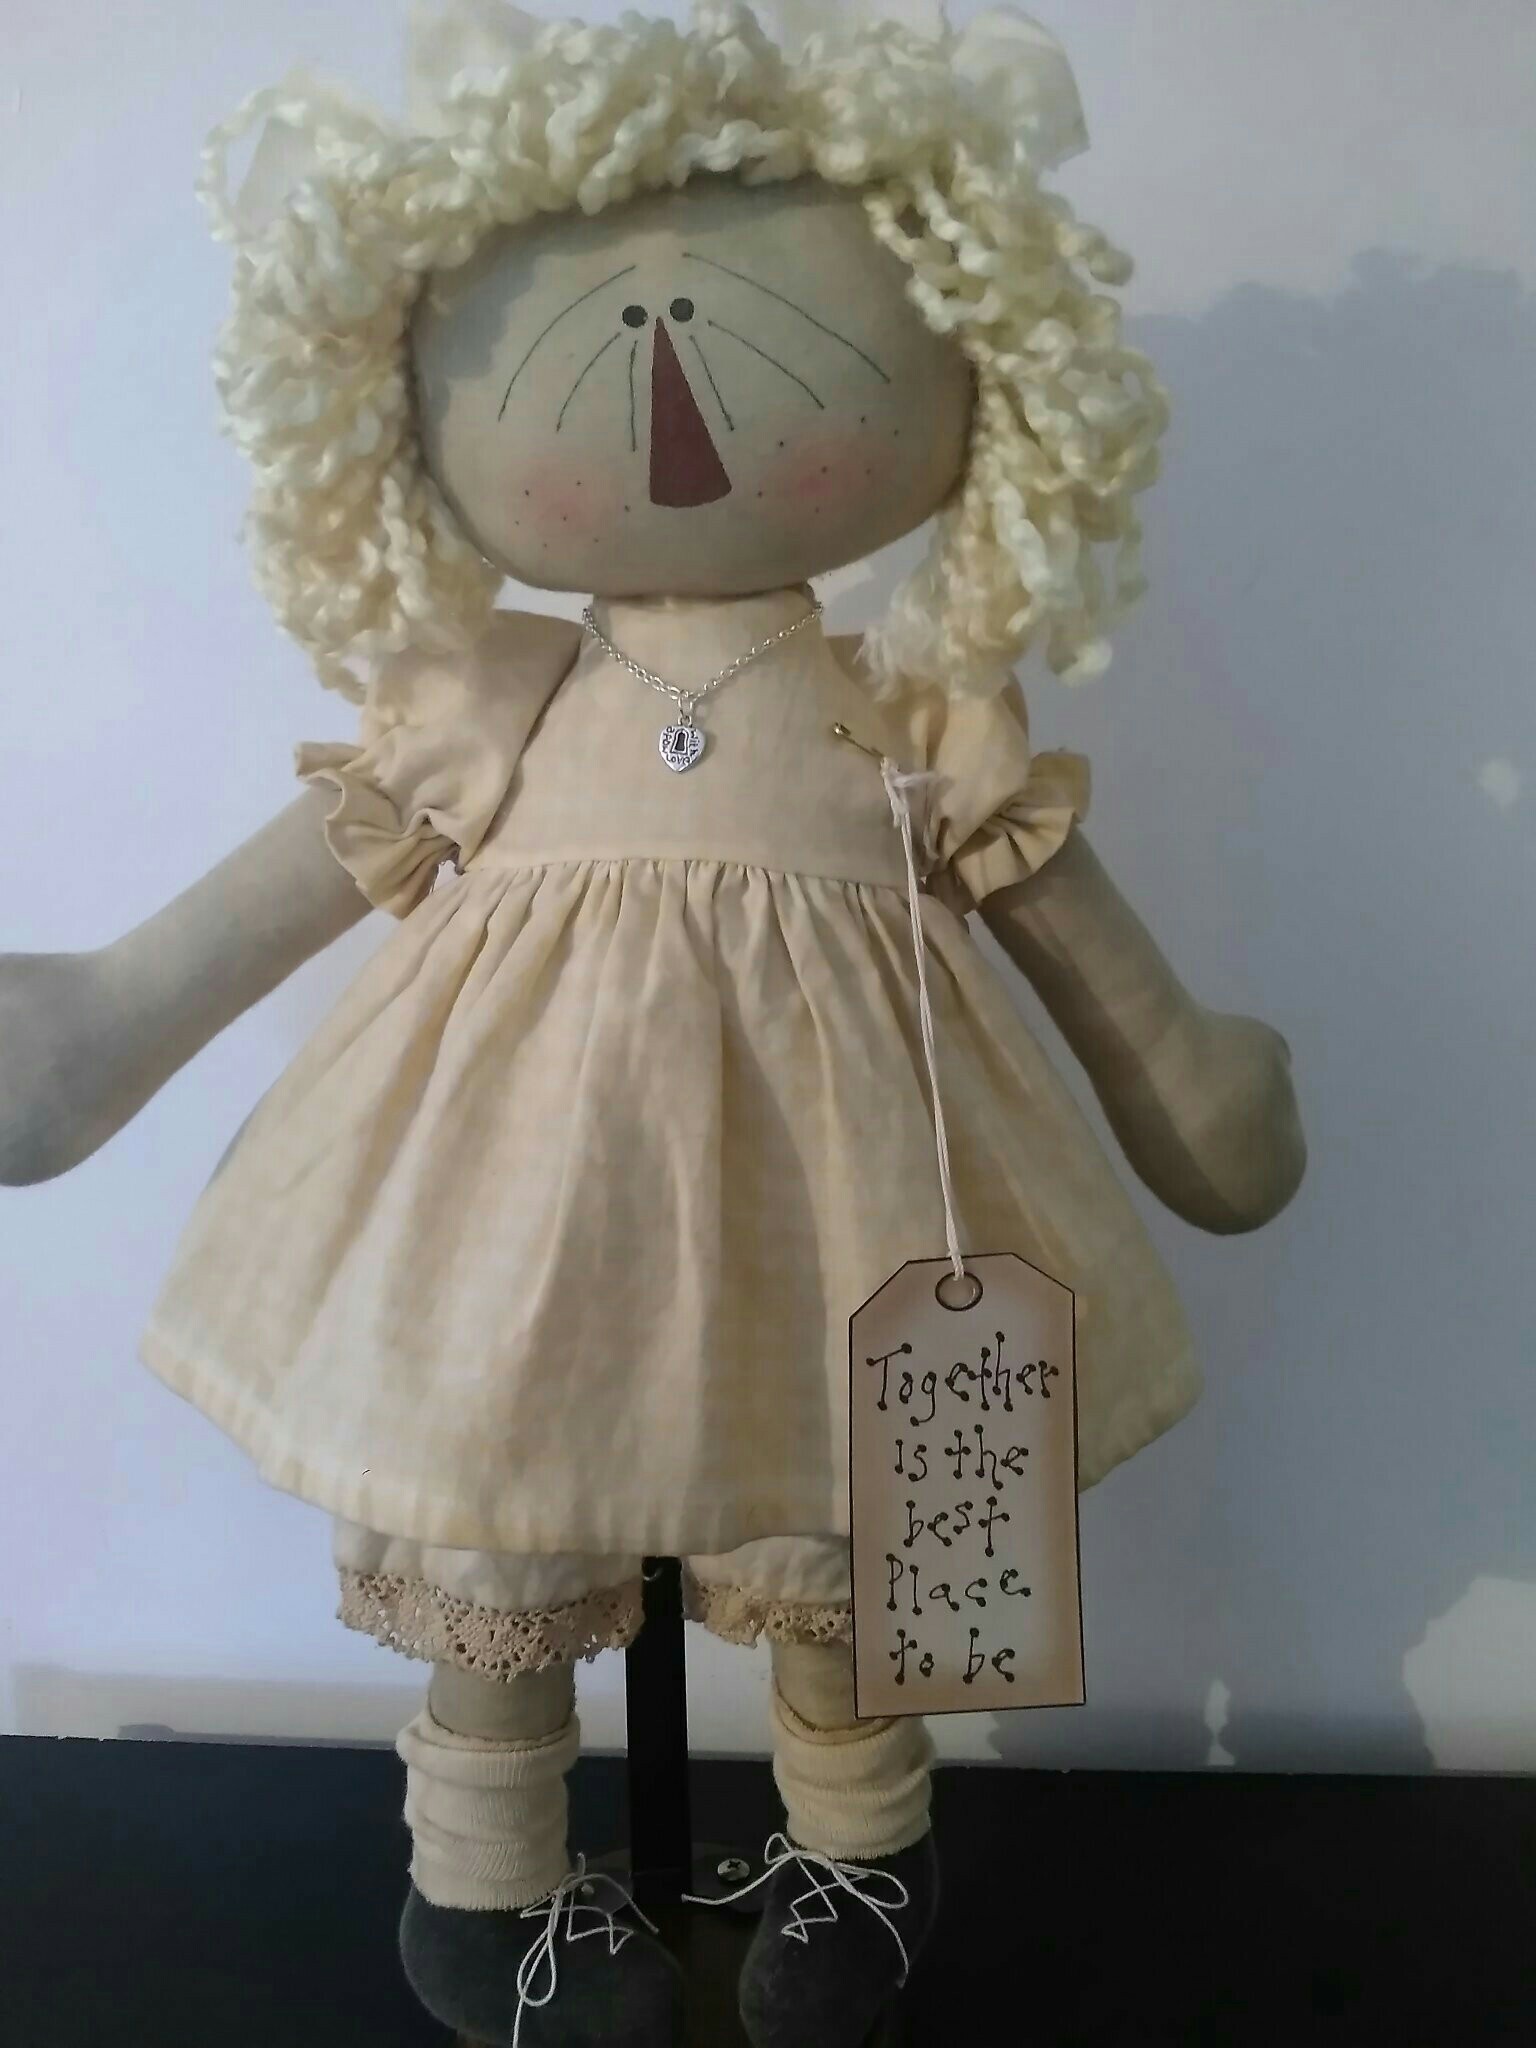 Together is the Best Place-handmade, hand crafted, primitive, country, rag doll, rag, doll, wholesale, retail, gift, present, friend gift, birthday gift, original, design, original design, Ronald McDonald House